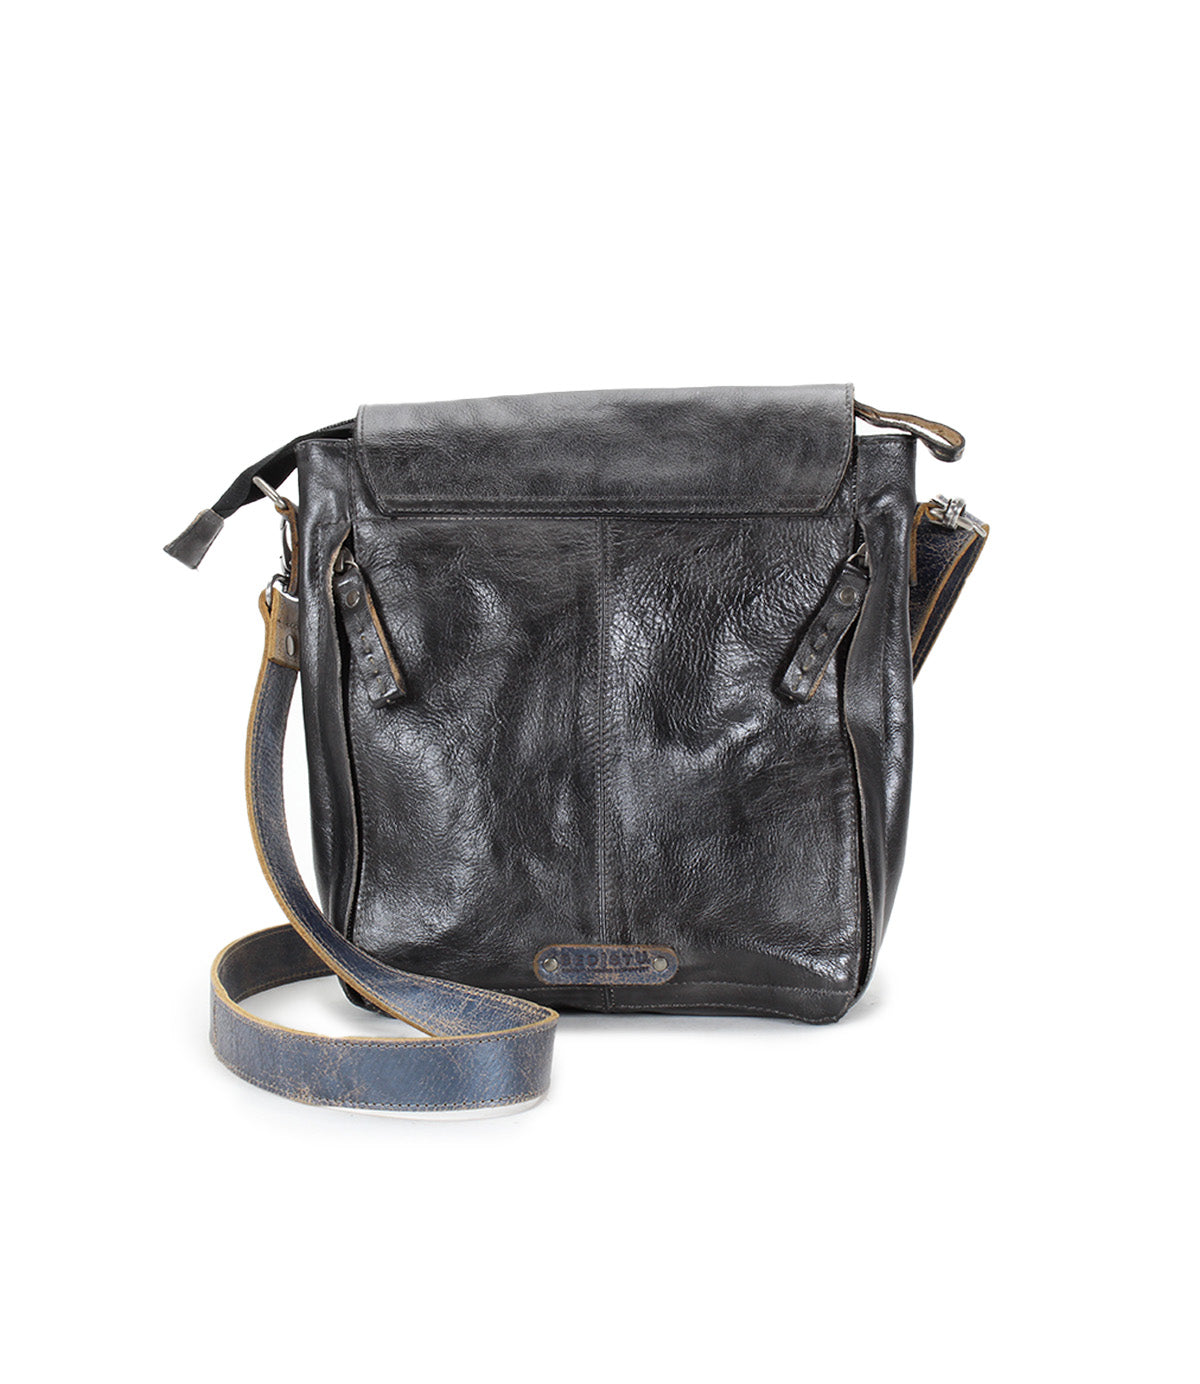 Ainhoa LTC black leather crossbody handbag by Bed Stu with an adjustable strap and front flap, featuring a secret pocket, isolated on a white background.